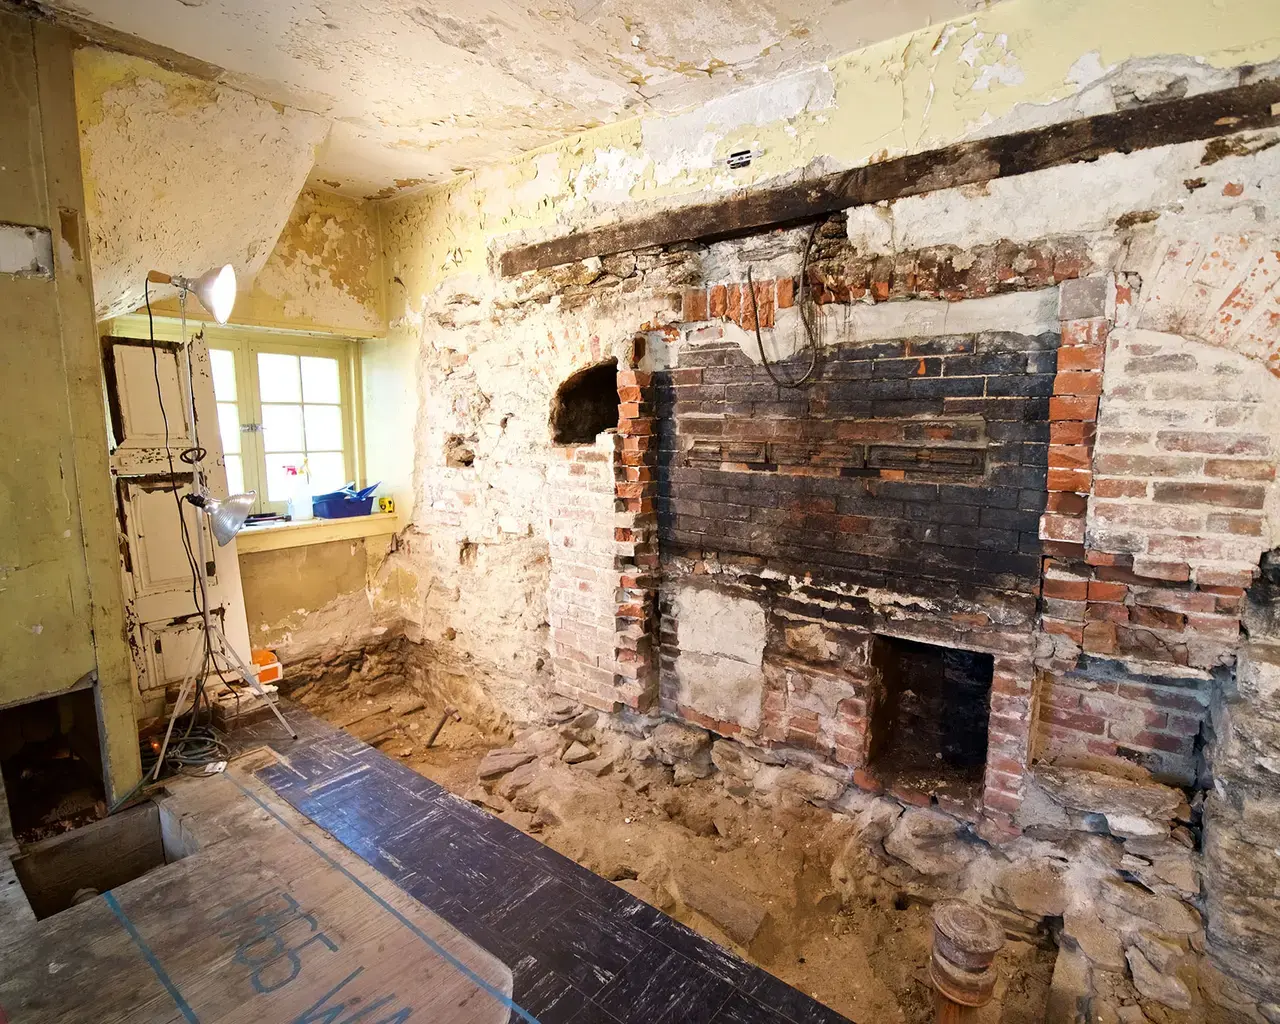 Architectural archaeology of Cliveden&rsquo;s historic 1767 kitchen. Photo courtesy of Cliveden of the National Trust.